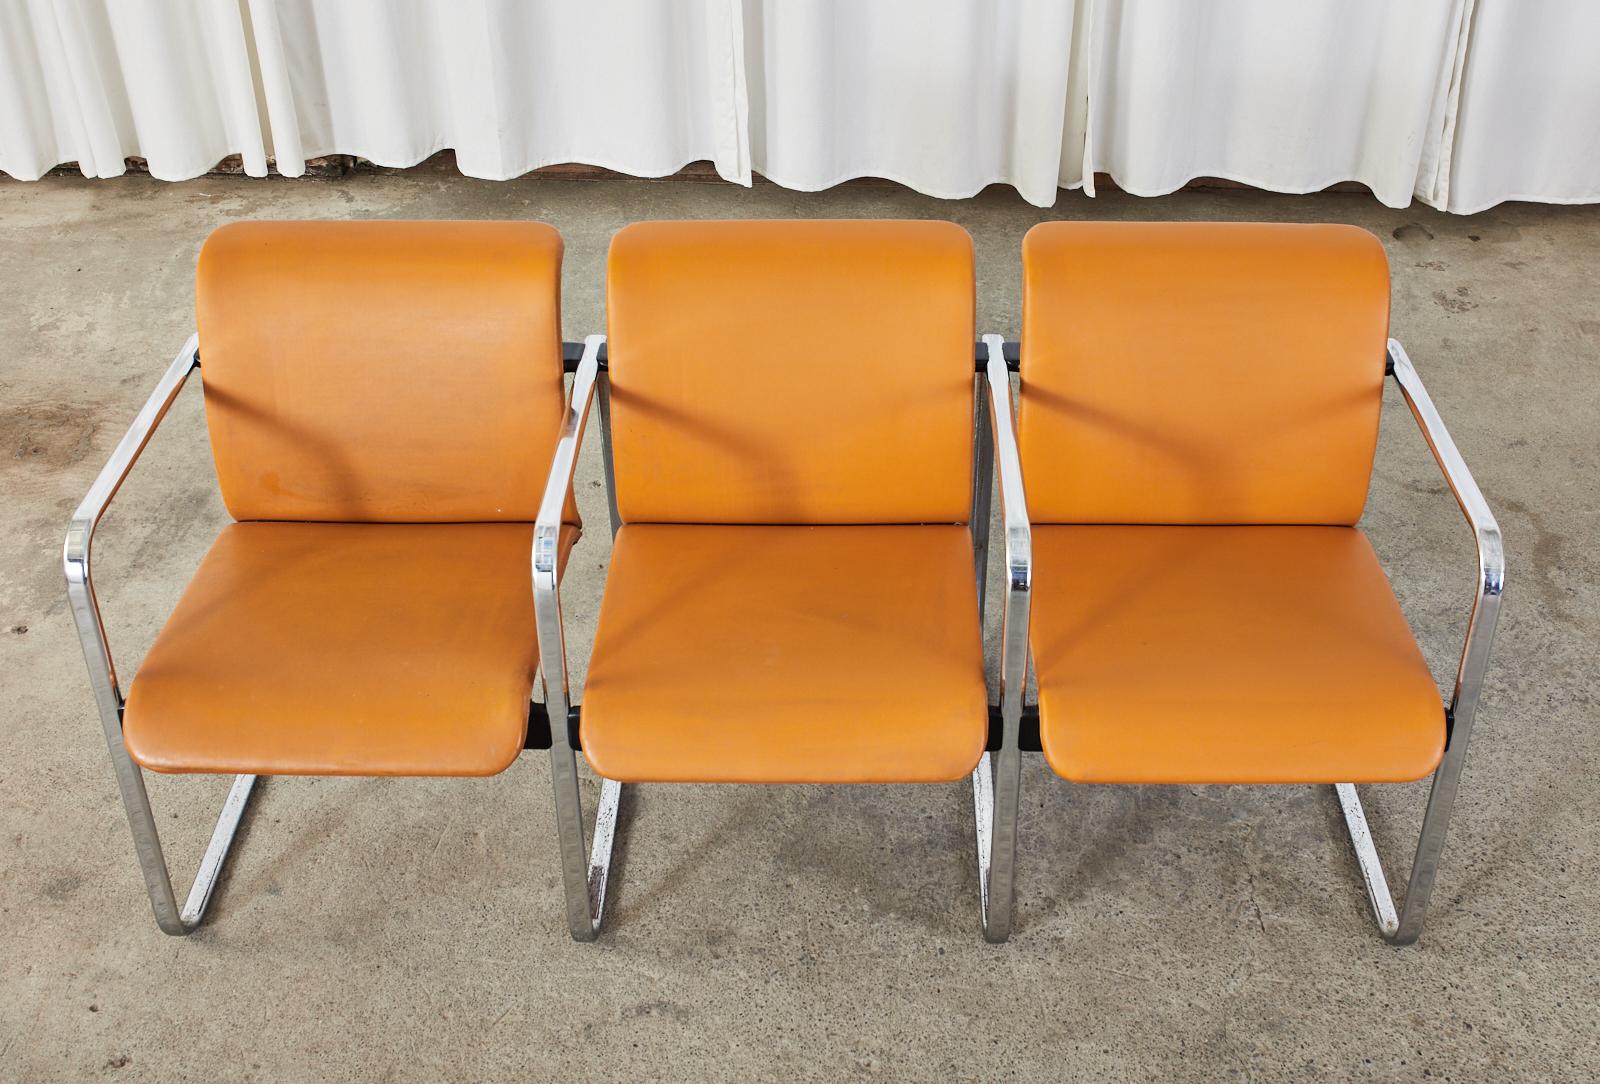 Midcentury Three Seat Tandem Chairs Peter Protzman Herman Miller For Sale 1